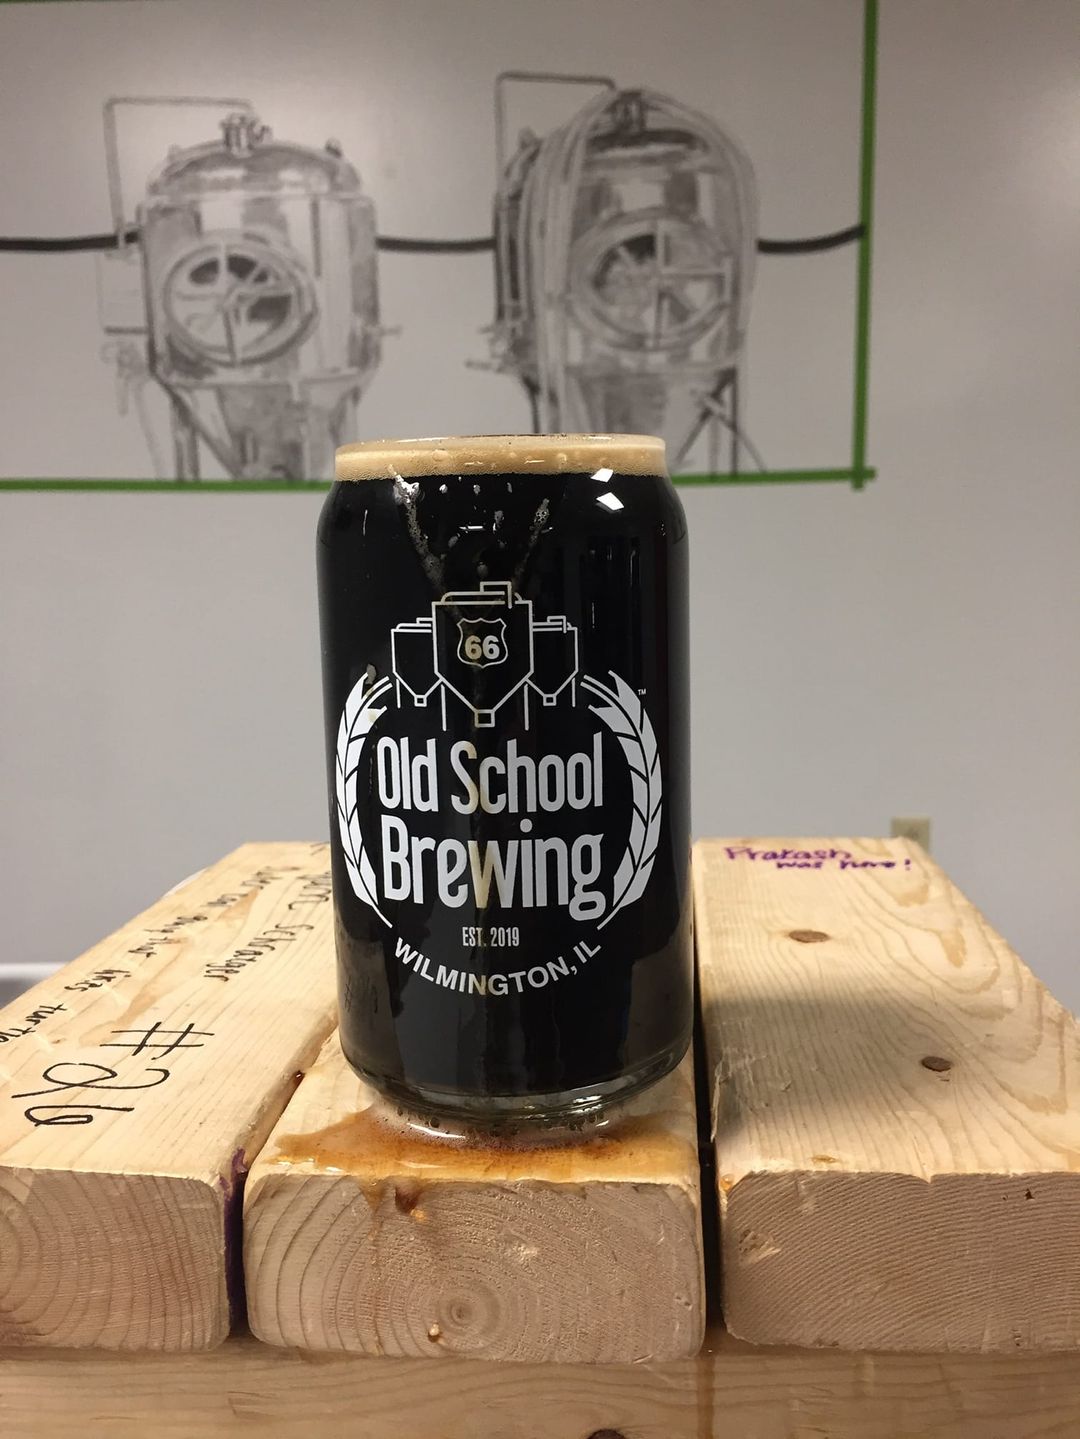 Push Your Luck by Rt66 Old School Brewing